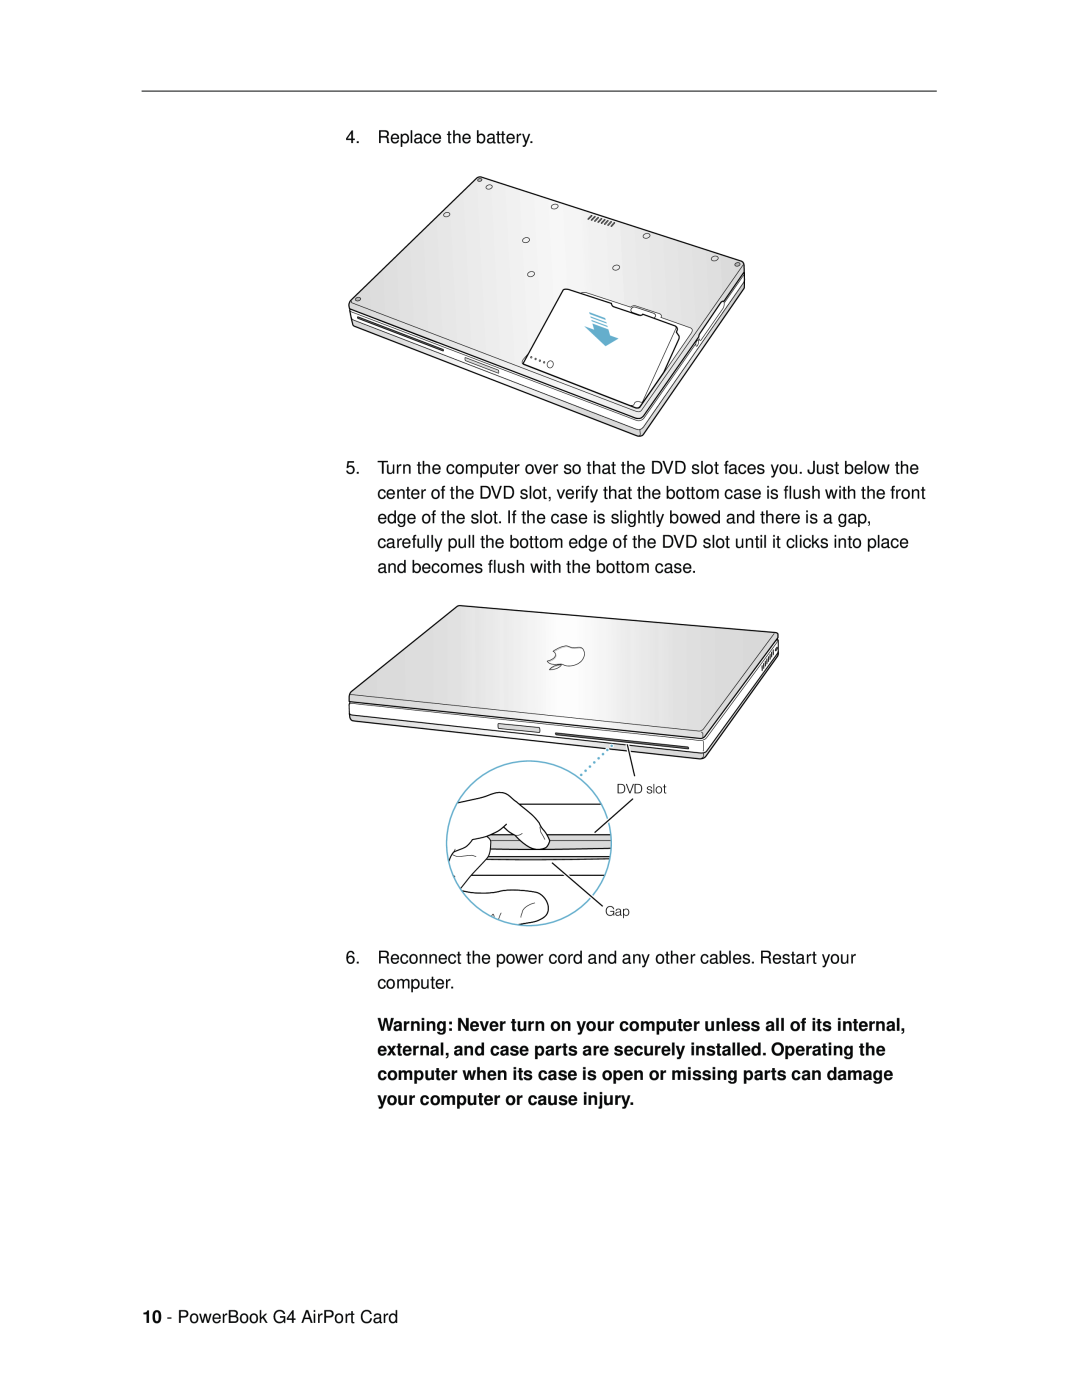 Apple G4 installation instructions Replace the battery 